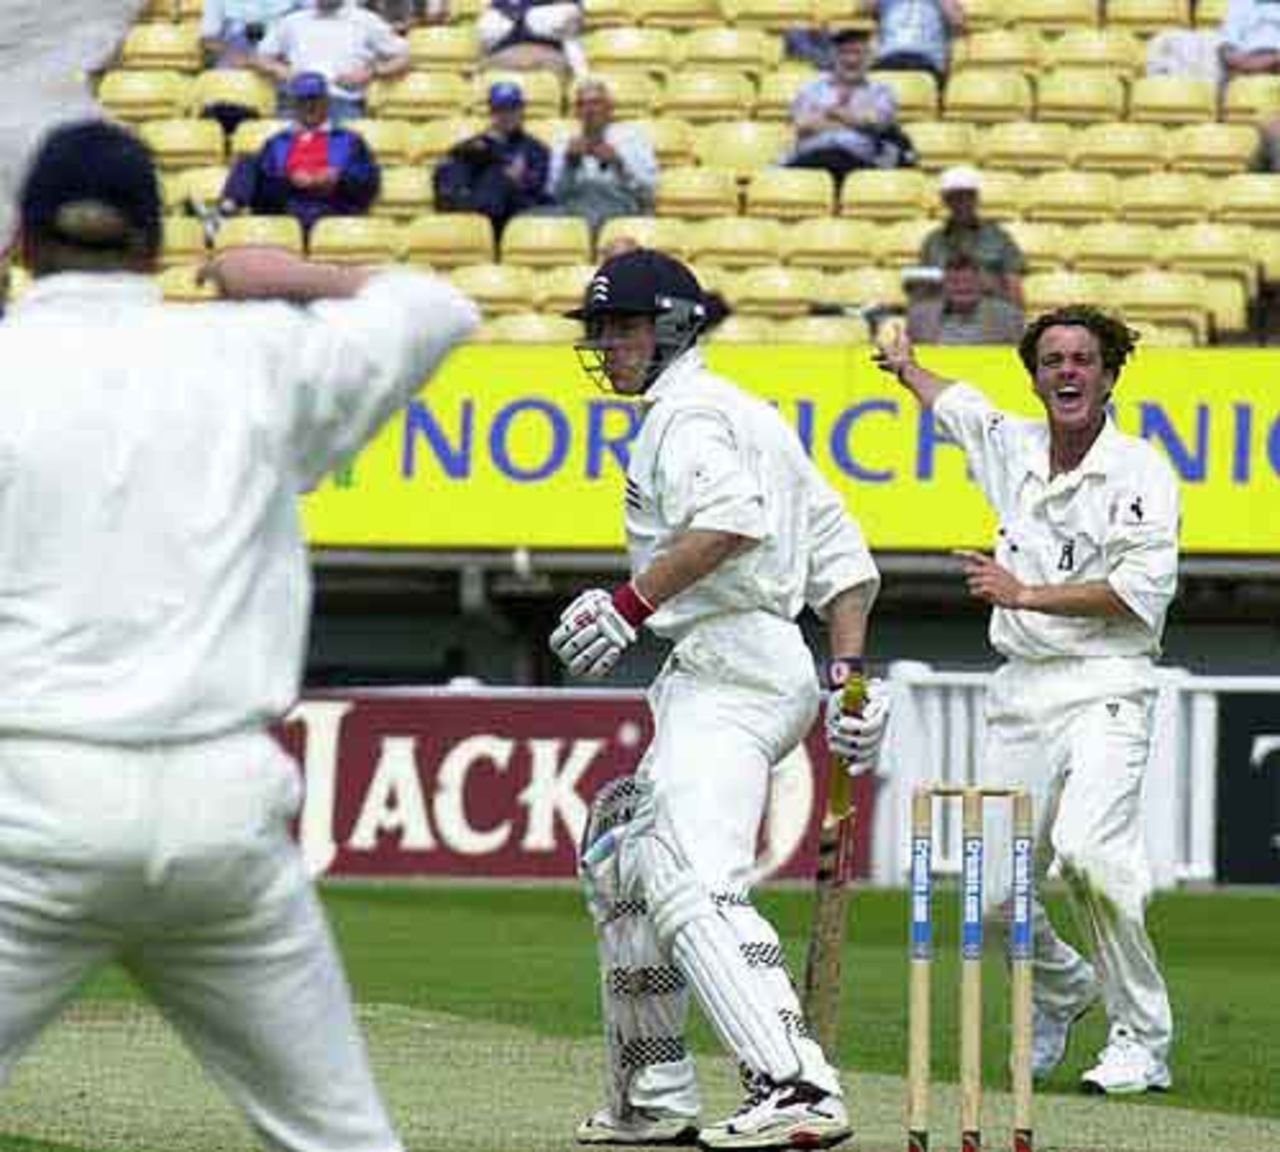 Betts appeals for the wicket of Andrew Strauss but not out